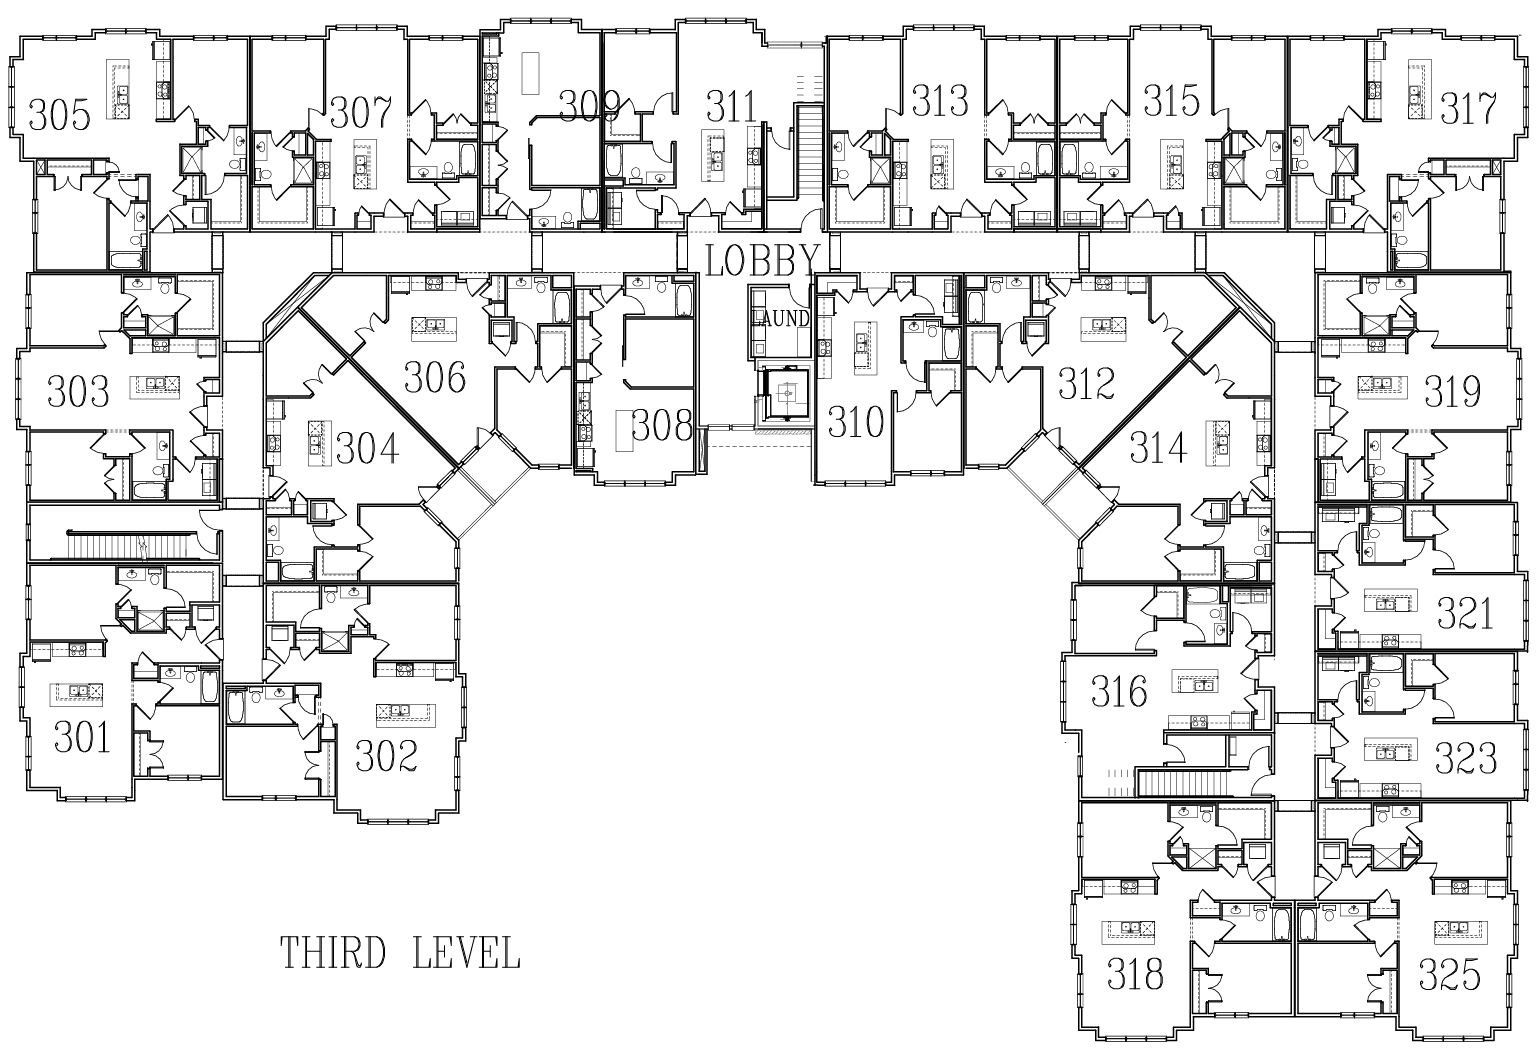 Image of building layout for third floor.